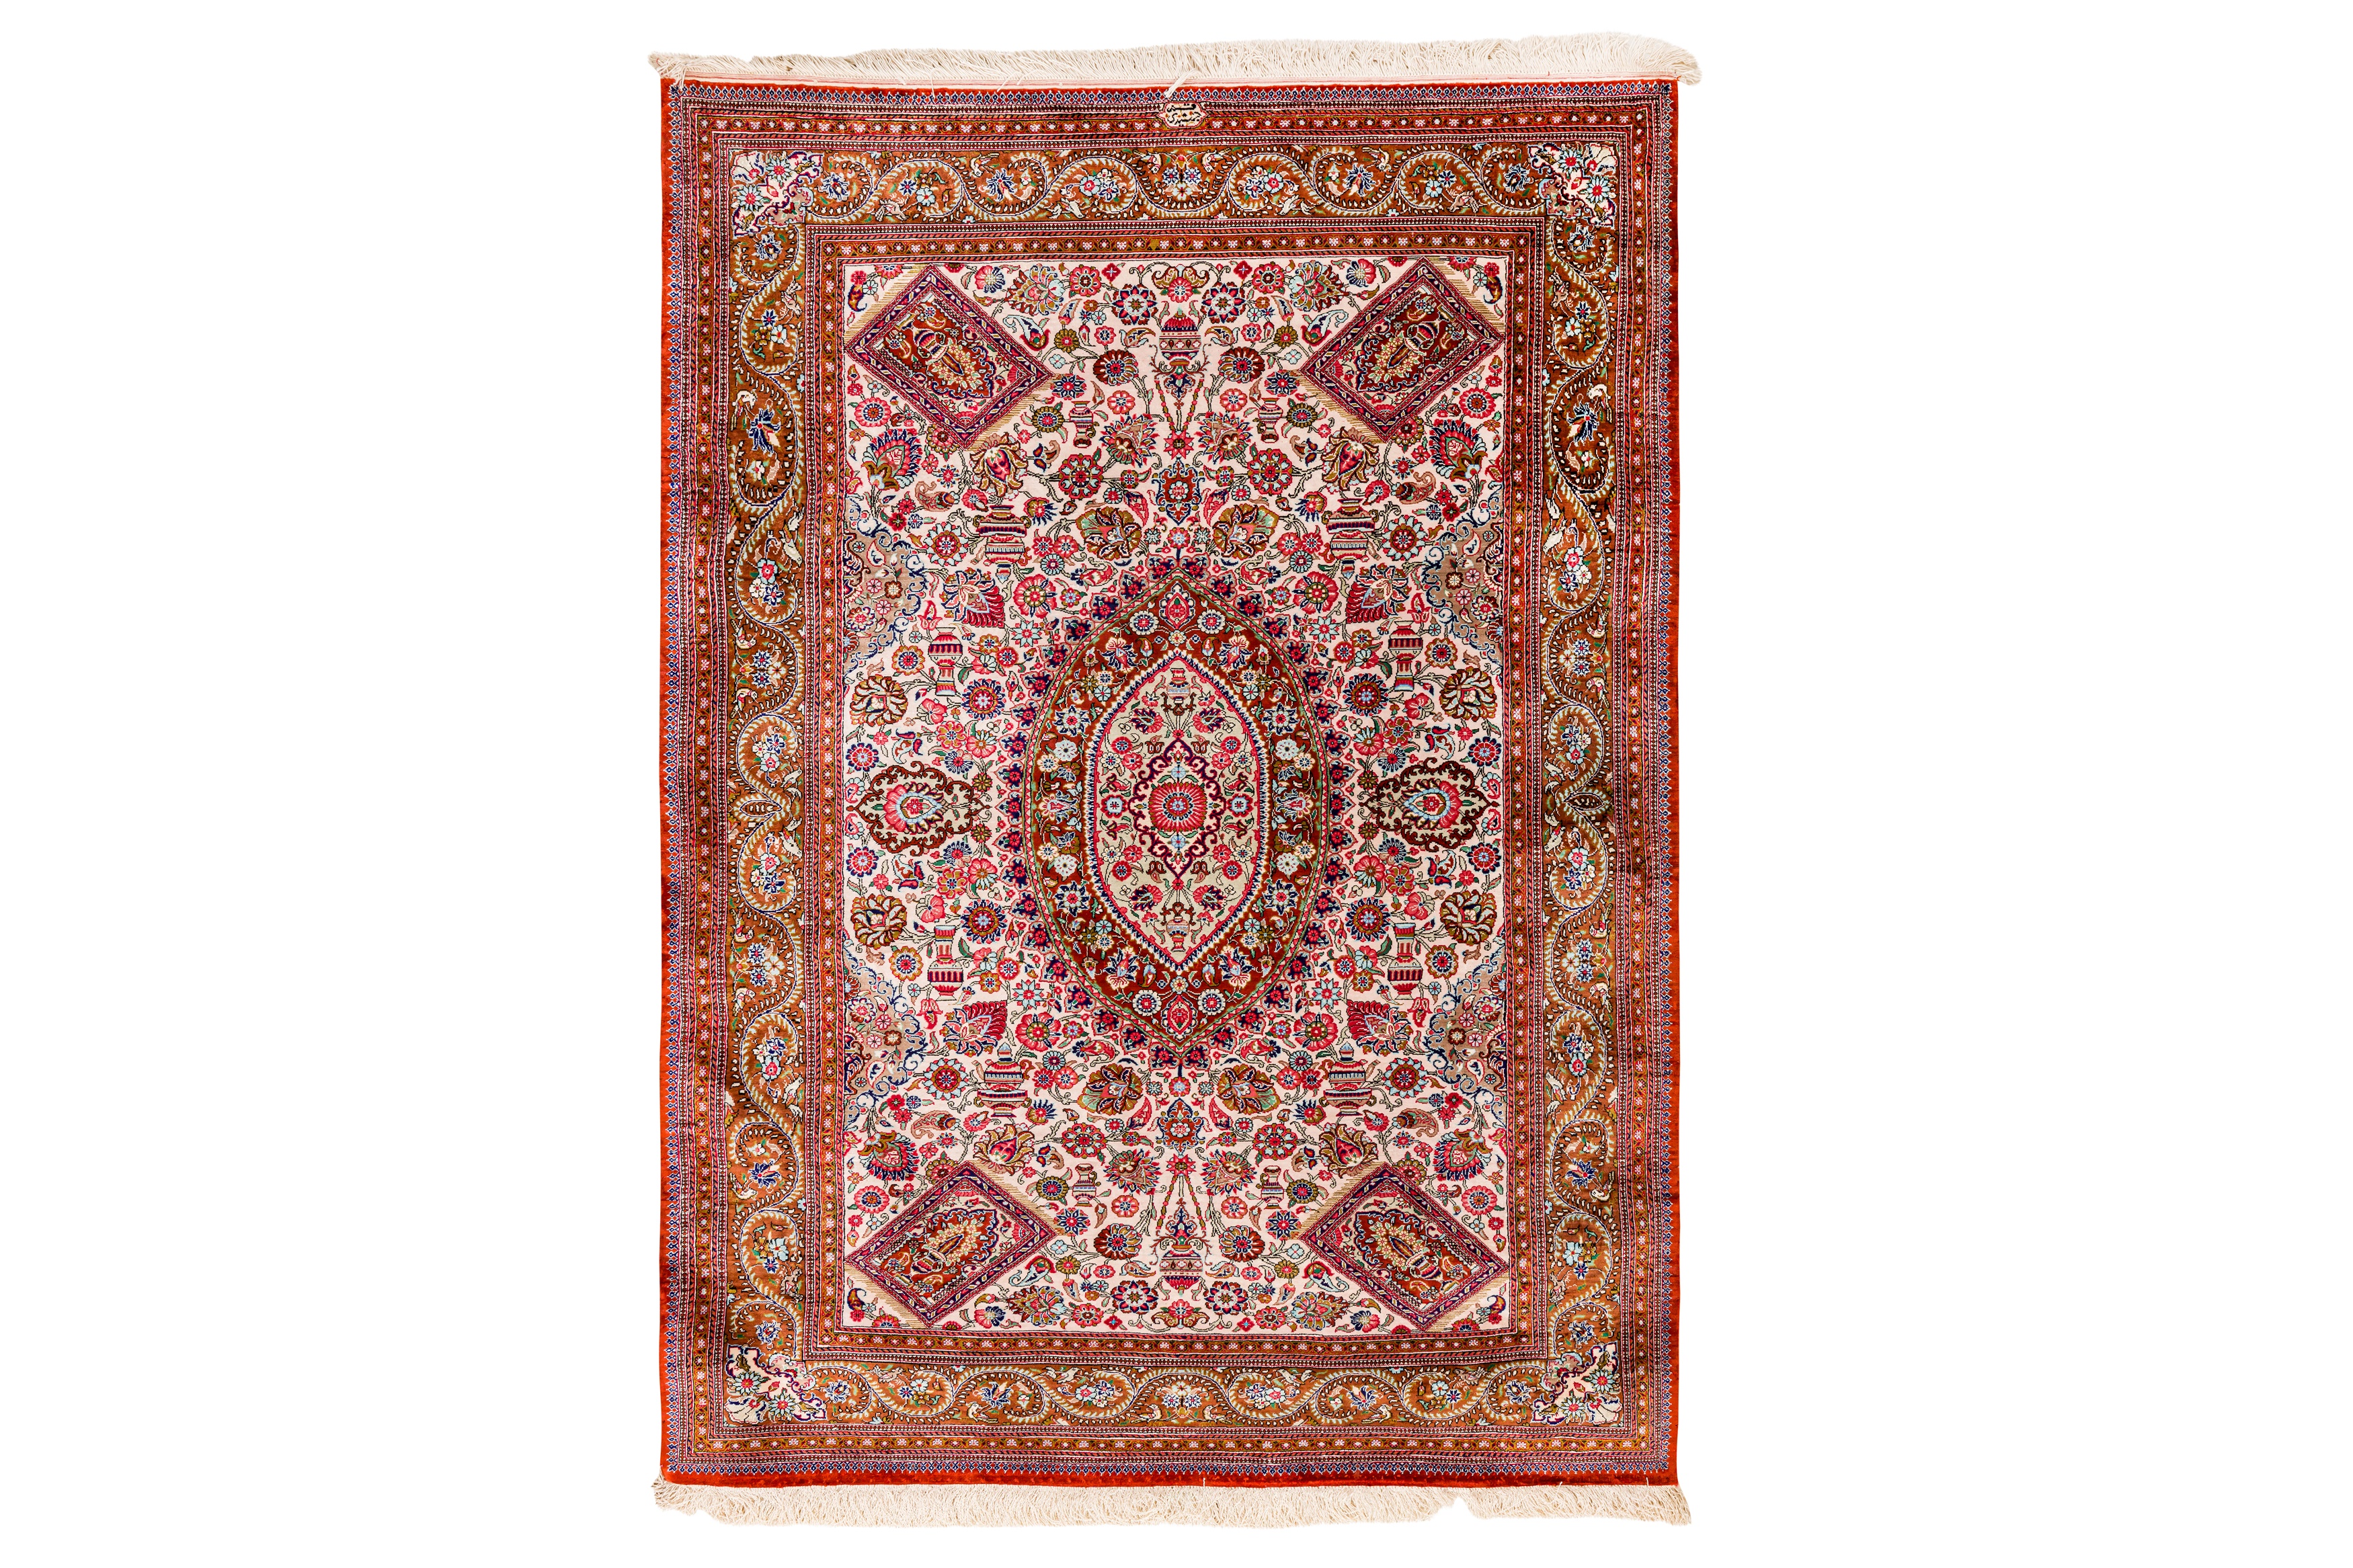 AN EXTREMELY FINE SIGNED SILK QUM RUG, CENTRAL PERSIA